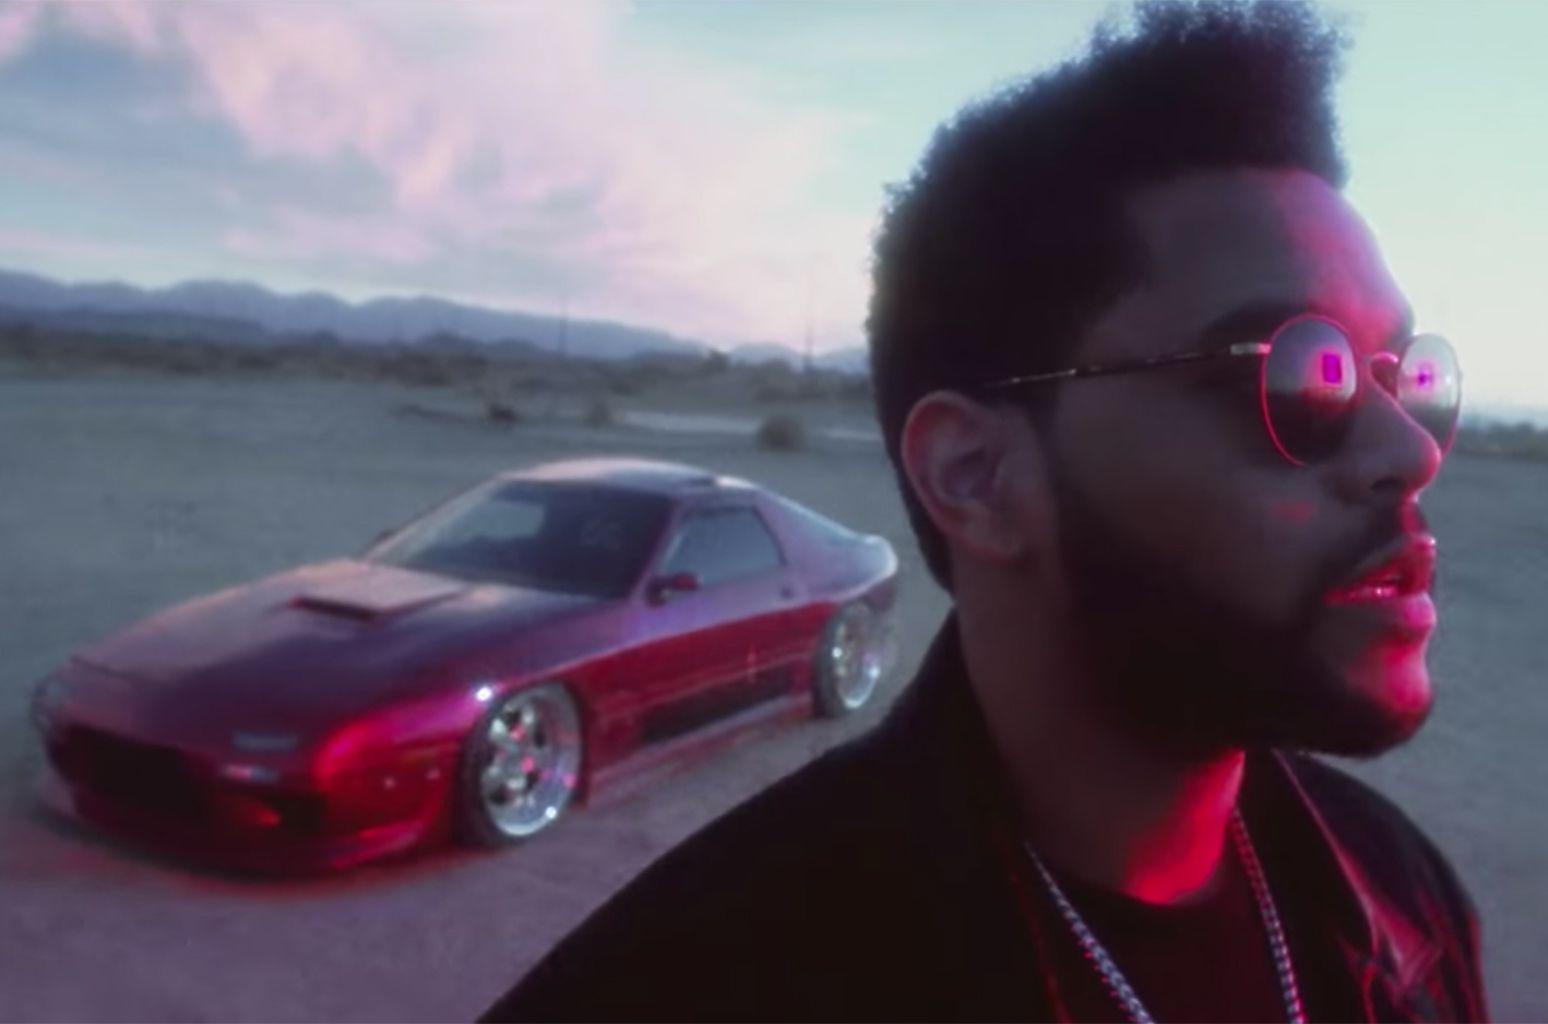 Monster Mazda Logo - The Weeknd 'Party Monster' Video: What You Need to Know About That ...